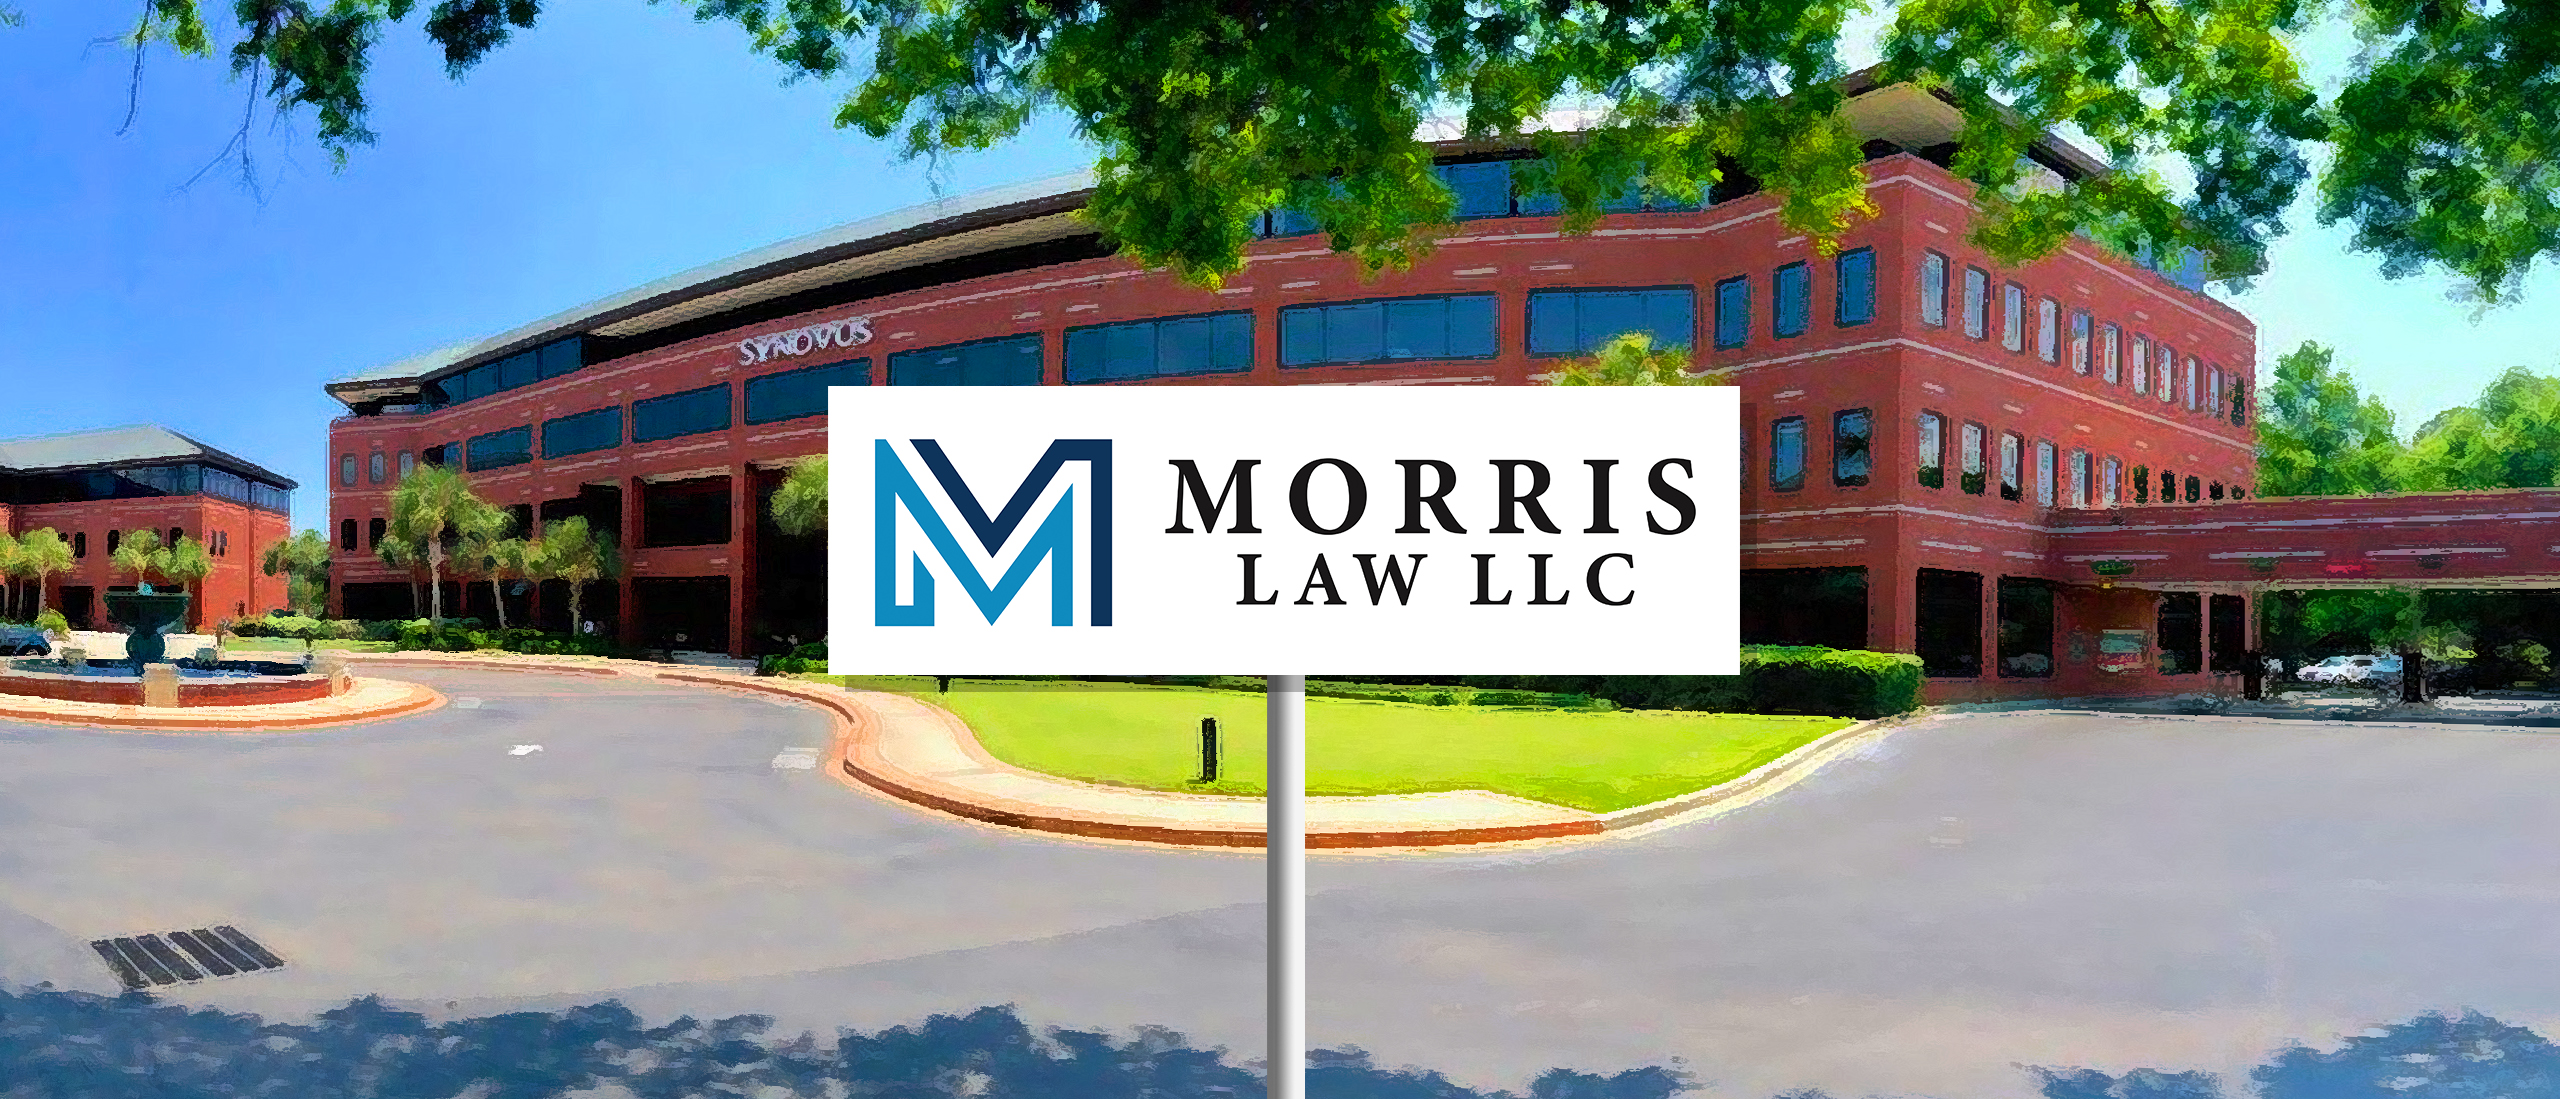 Morris Law New Location in Myrtle Beach.